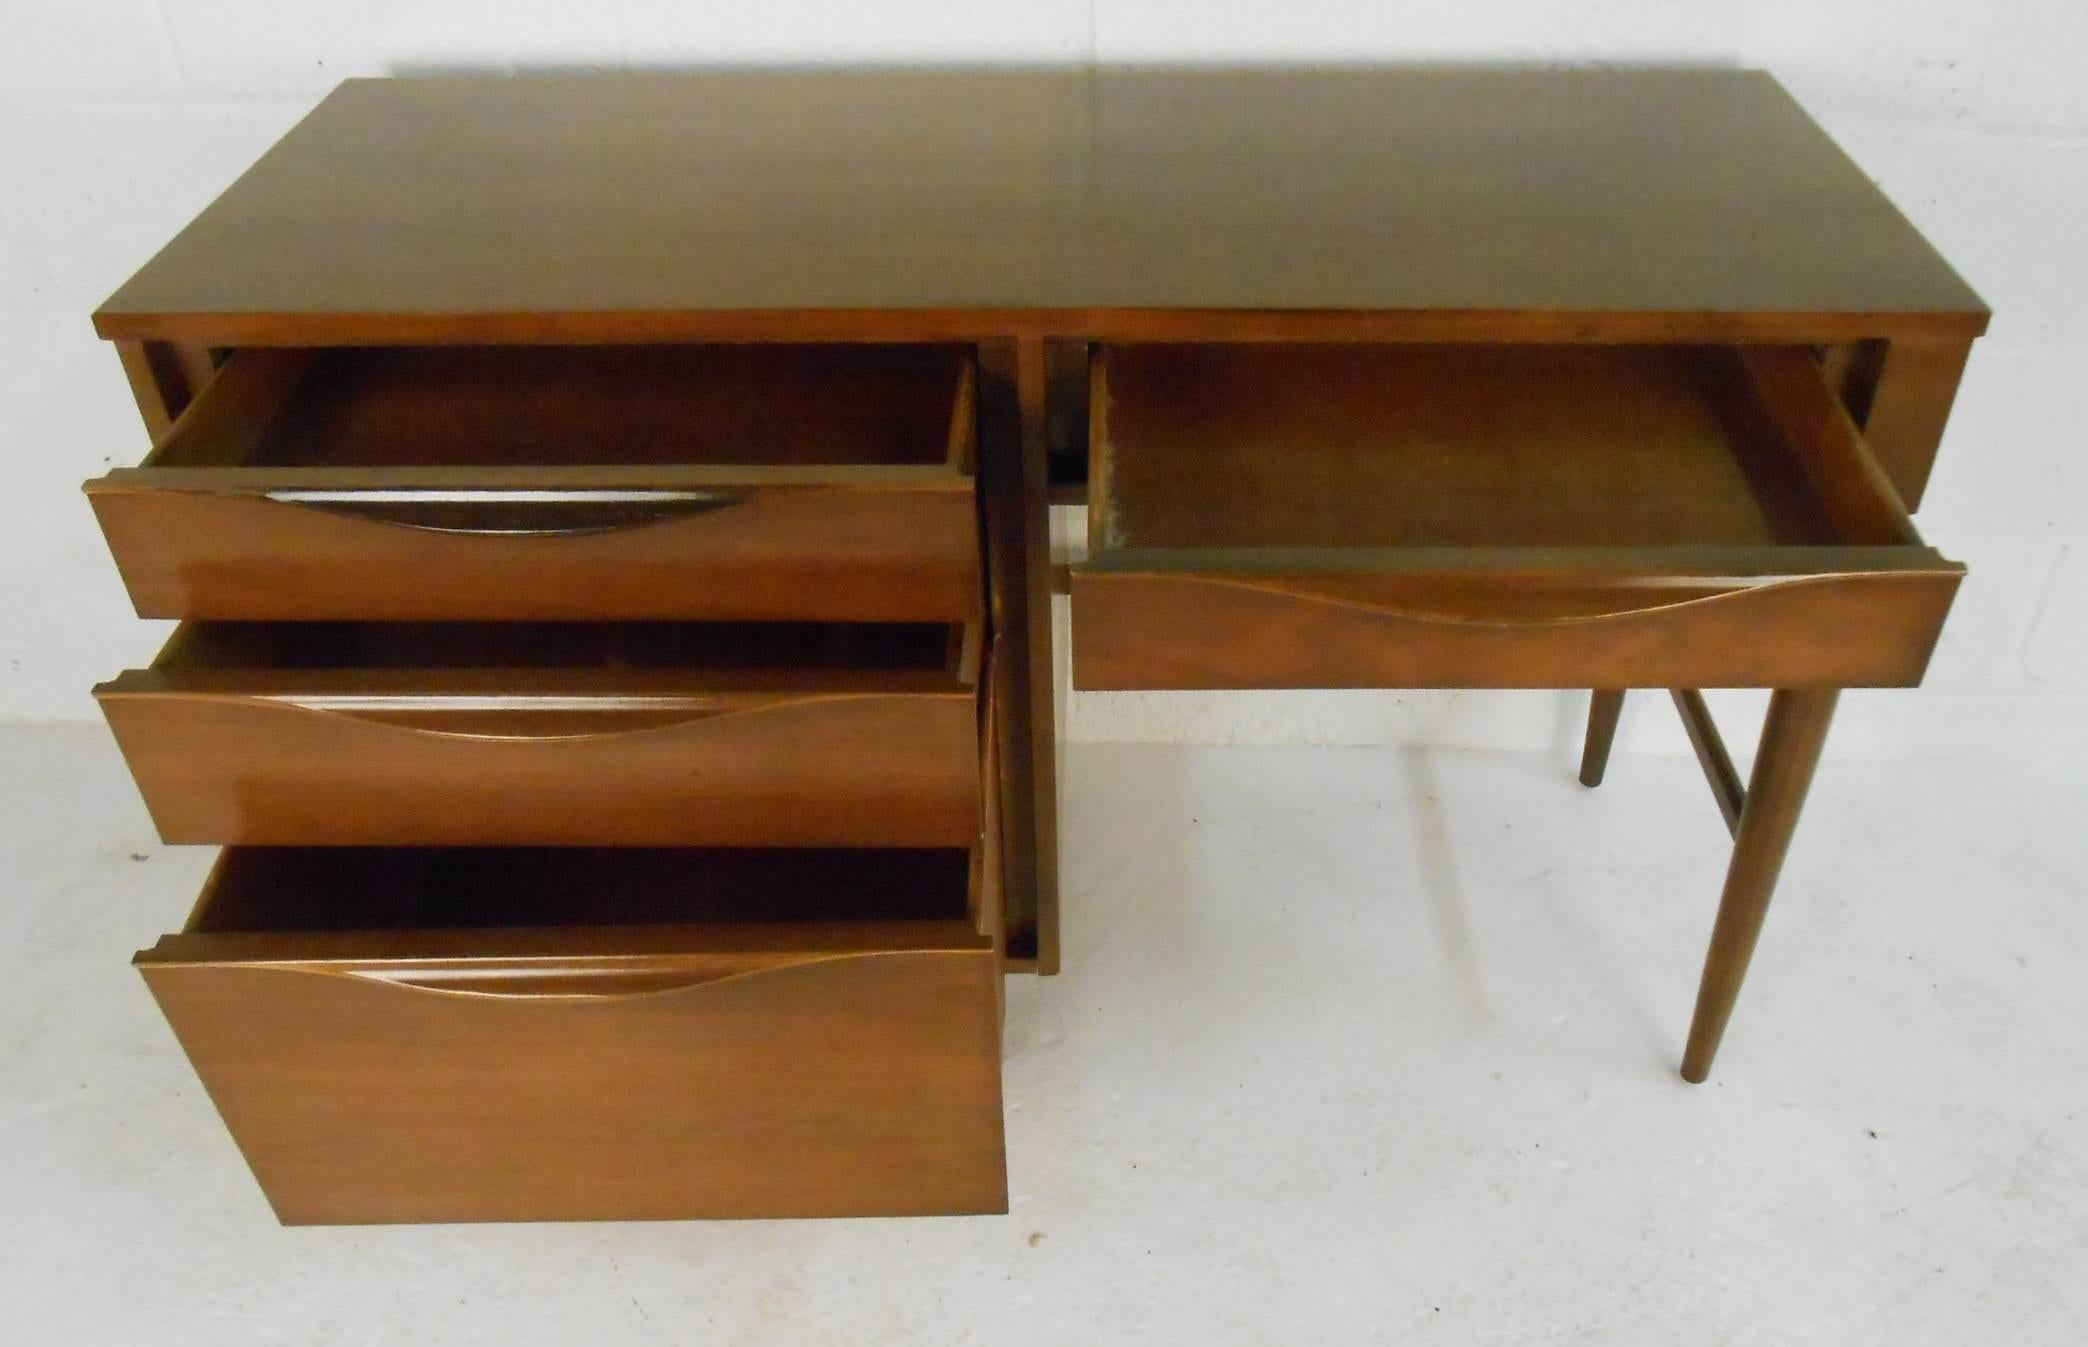 This beautiful vintage modern desk features unique curved drawer pulls and a finished back. Sleek design with a 48 inch wide top providing plenty of work space and four large drawers for ample storage space. Quality craftsmanship with an elegant